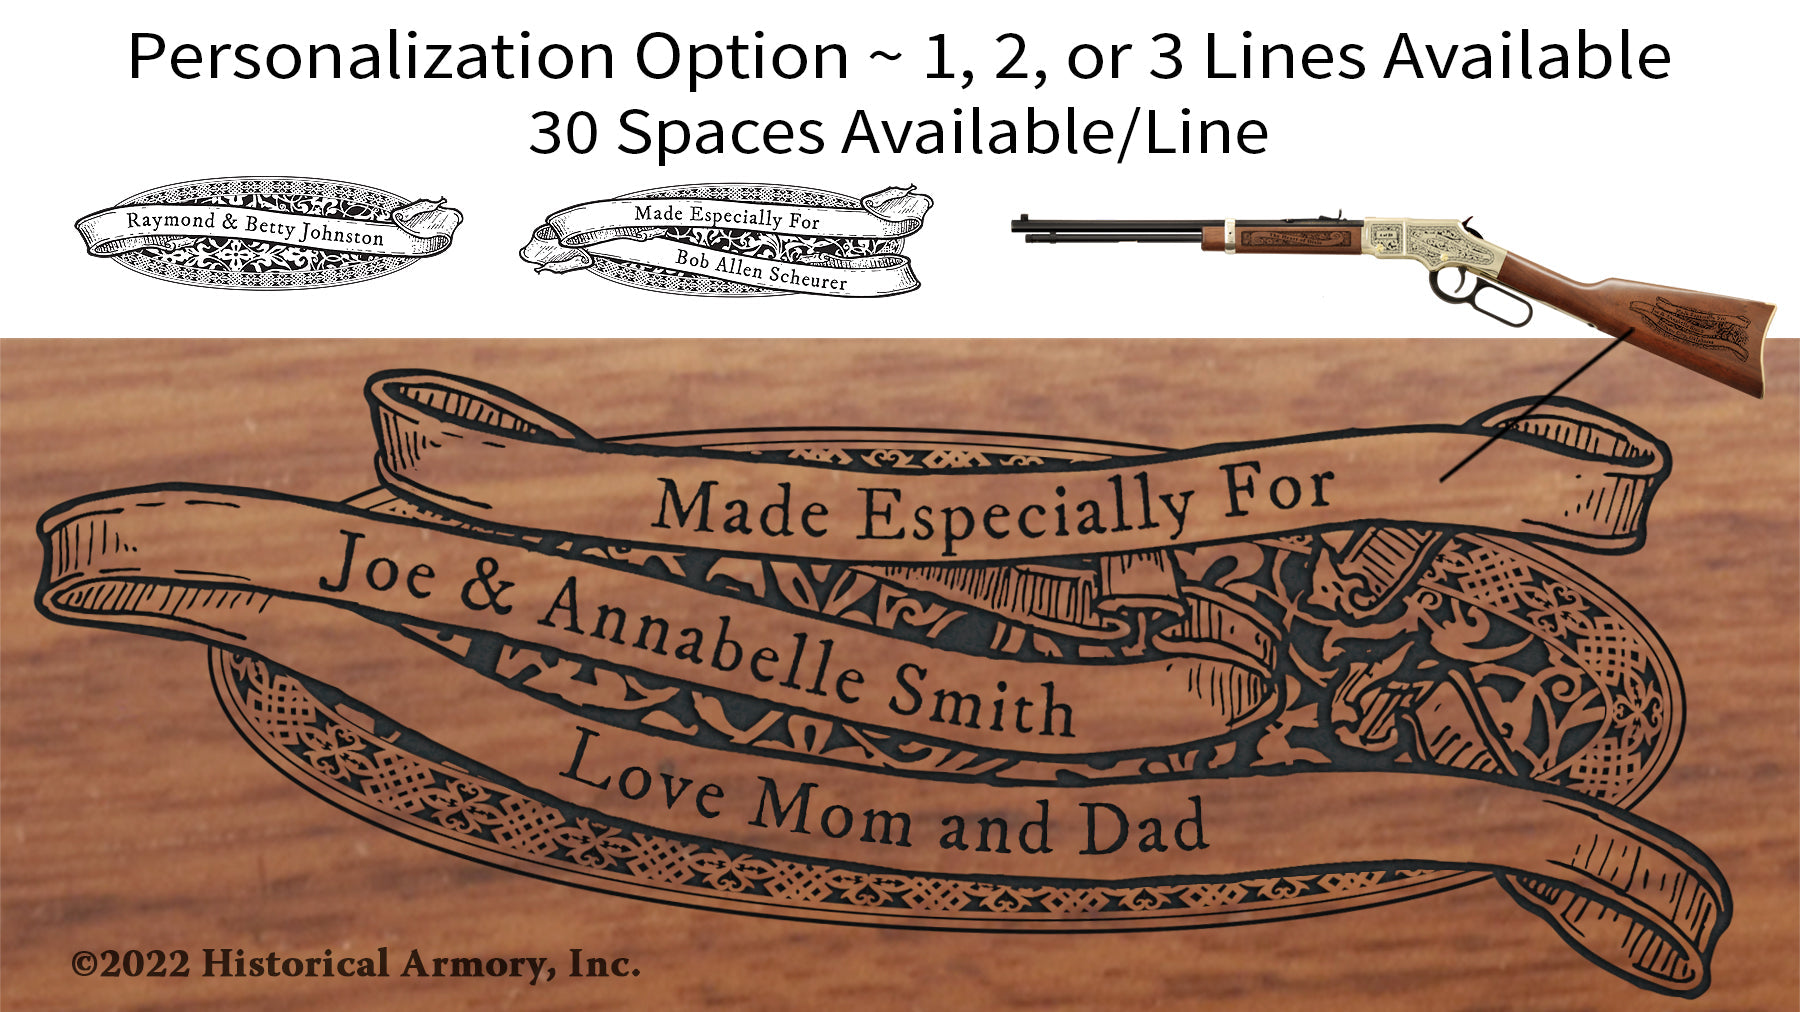 Montana State Pride Engraved Rifle Personalization